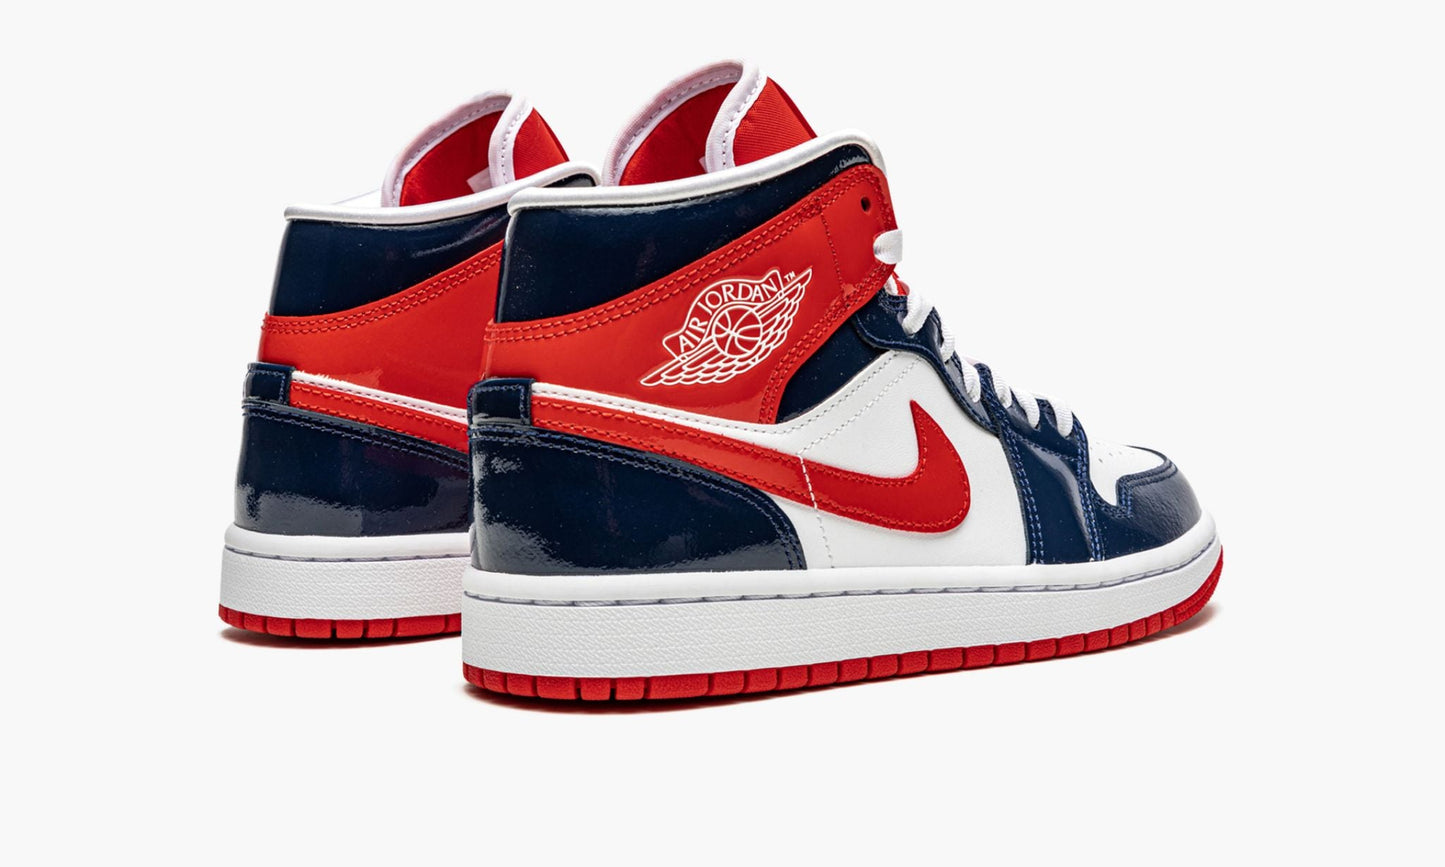 WMNS Air Jordan 1 Mid "Patent Leather Navy / White / Red"